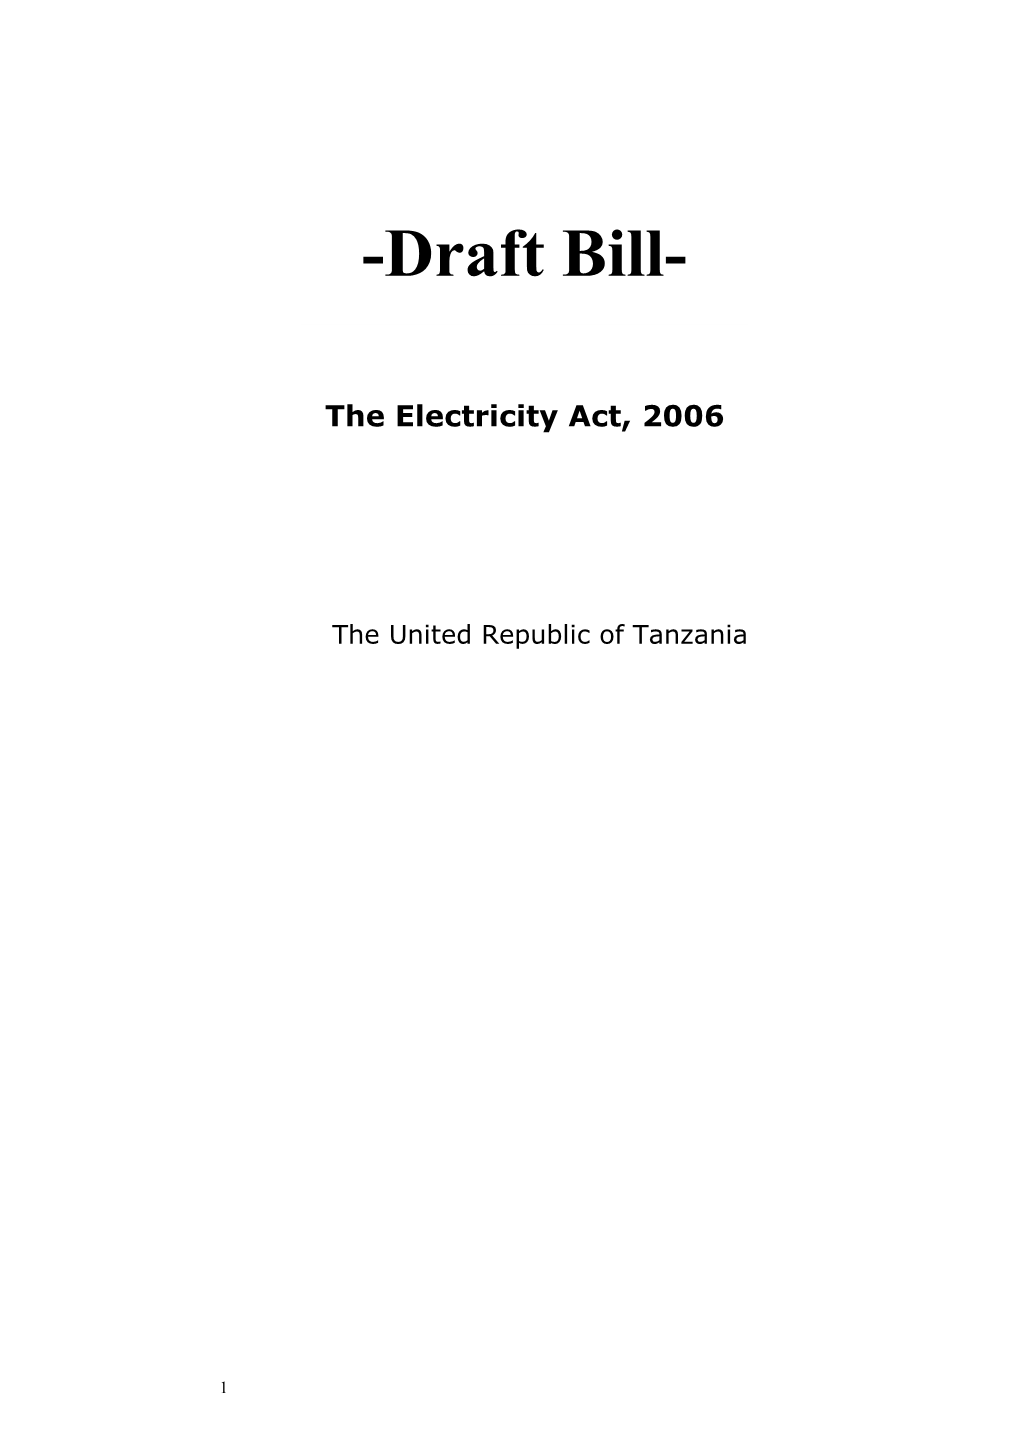 The Electricity Act, 2006